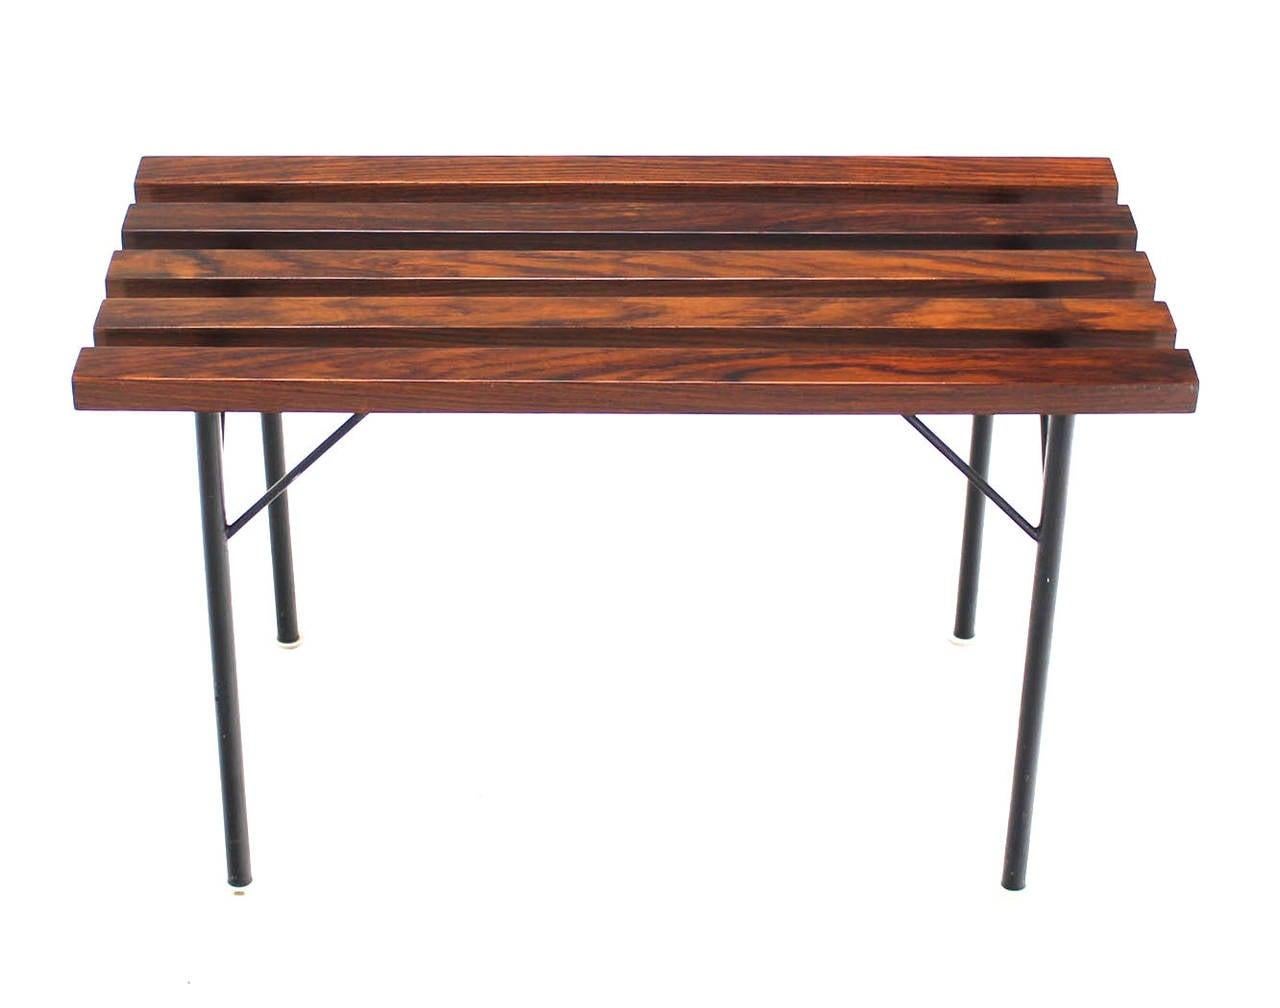 Solid Rosewood Small Compact Mid Century Modern Slat Bench Black Metal Base MINT In Excellent Condition For Sale In Rockaway, NJ